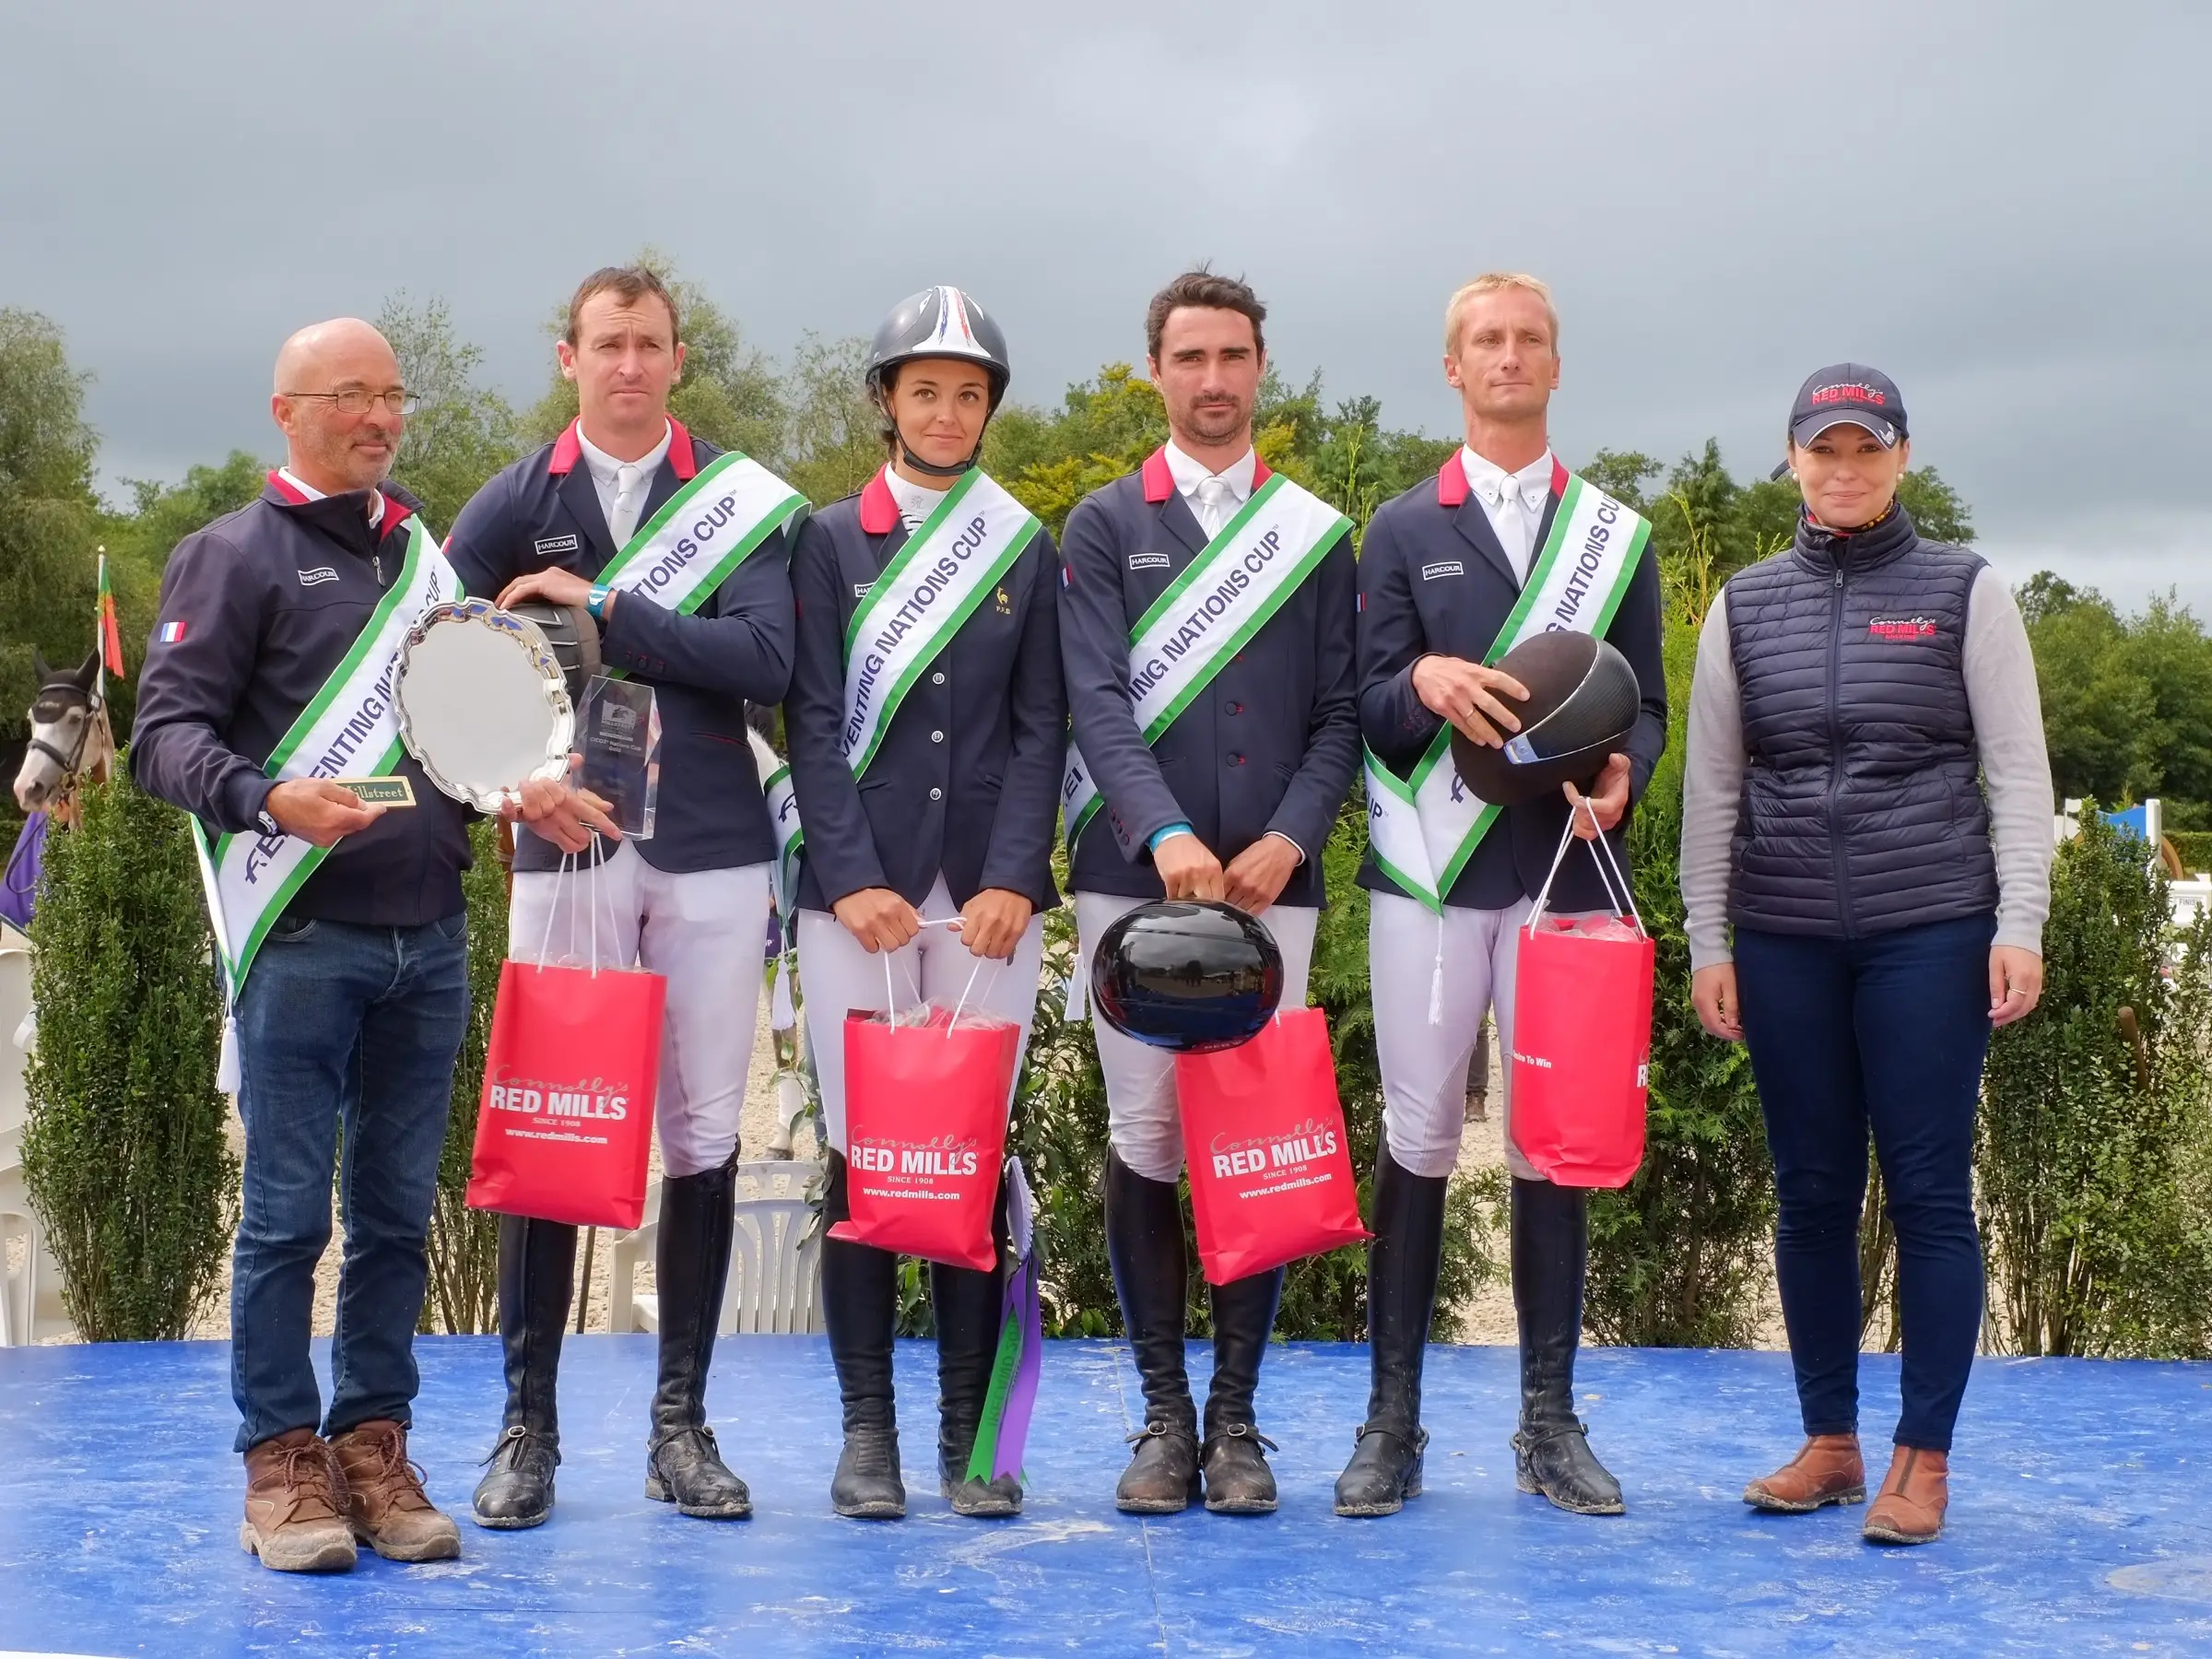 Podium finish for Irish Eventing team in Millstreet Nations Cup